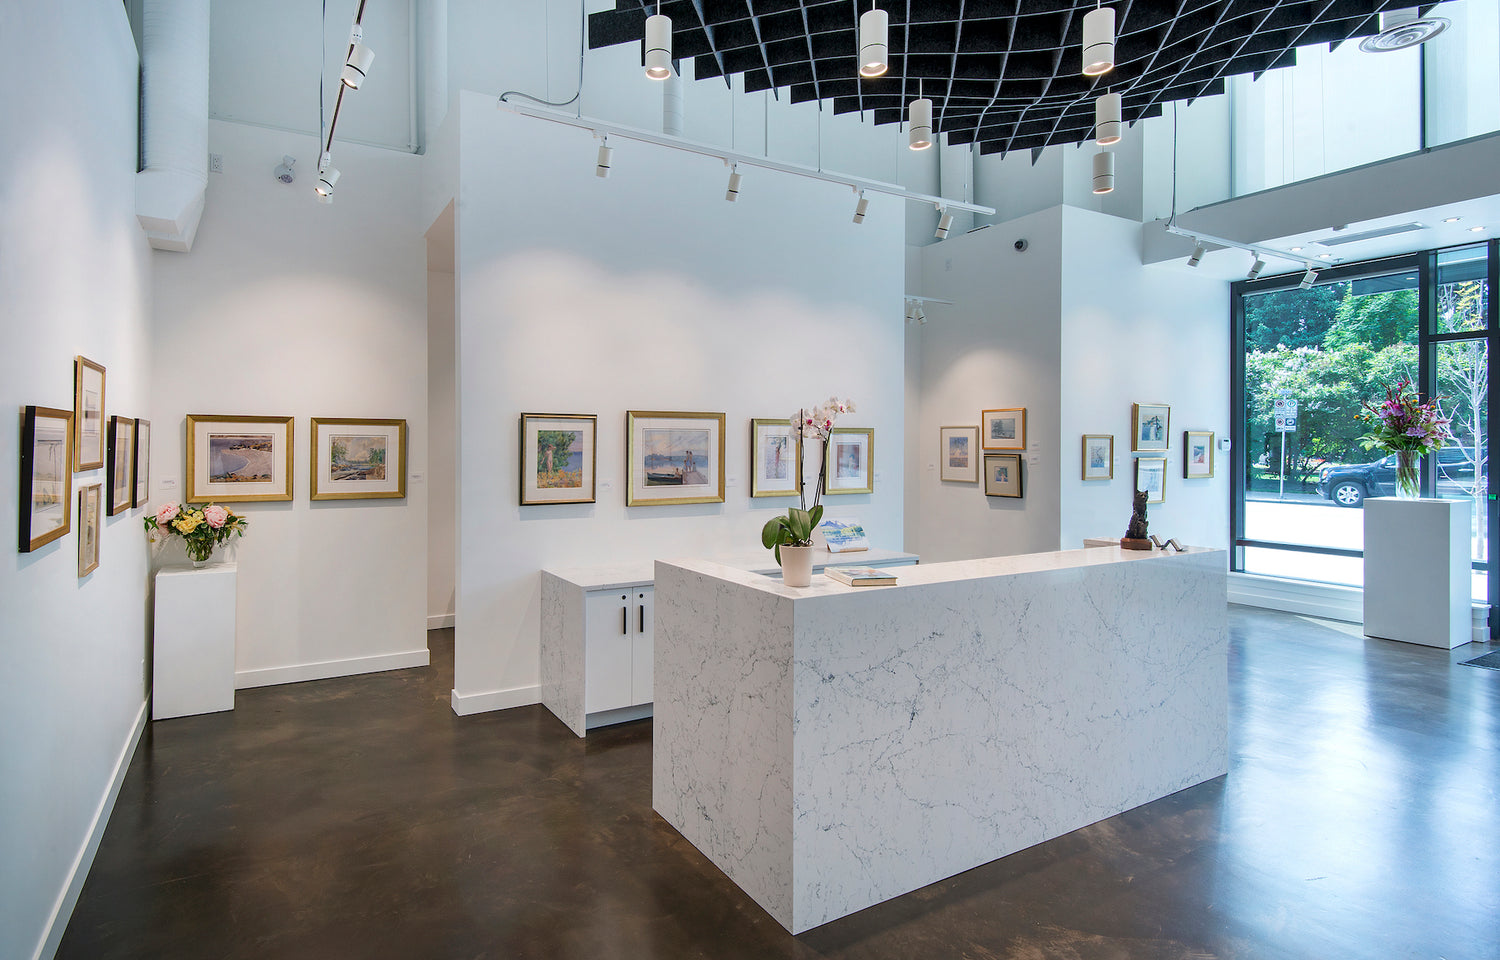 Photograph of a commercial art gallery with paintings hanging white walls, a bright window and bouquets of flowers.